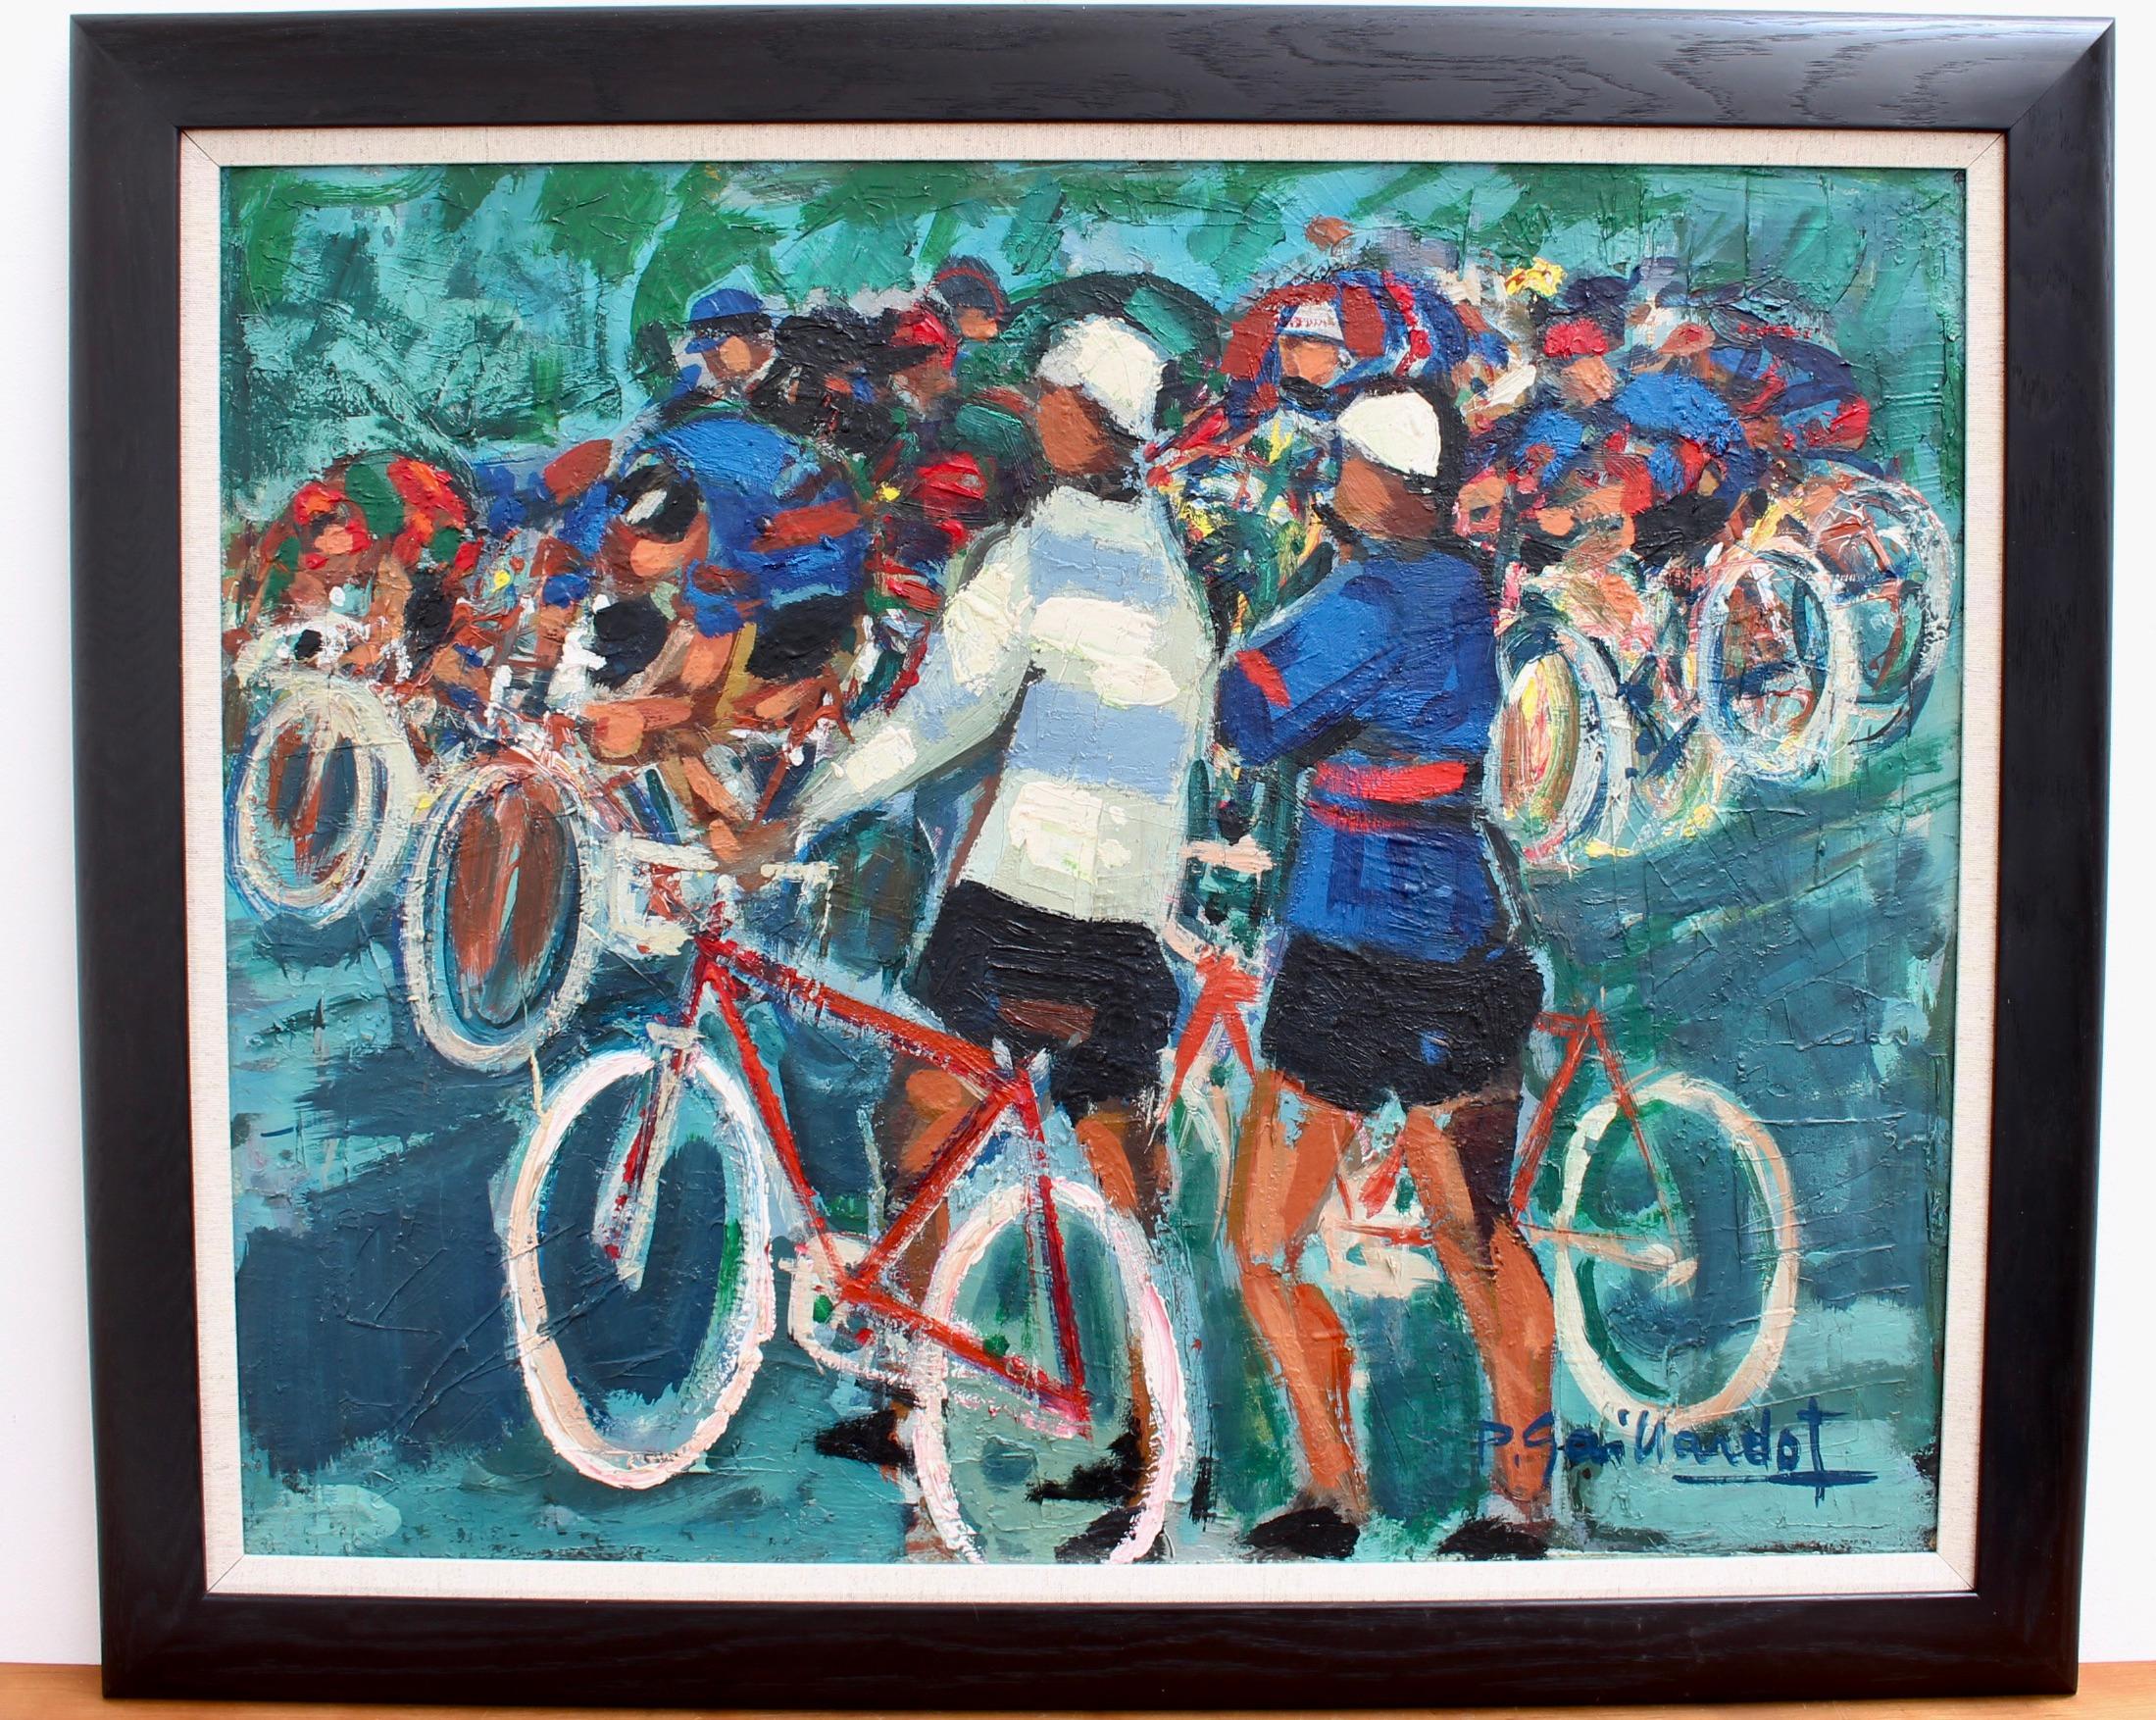 The Cyclists - Expressionist Painting by Pierre Gaillardot